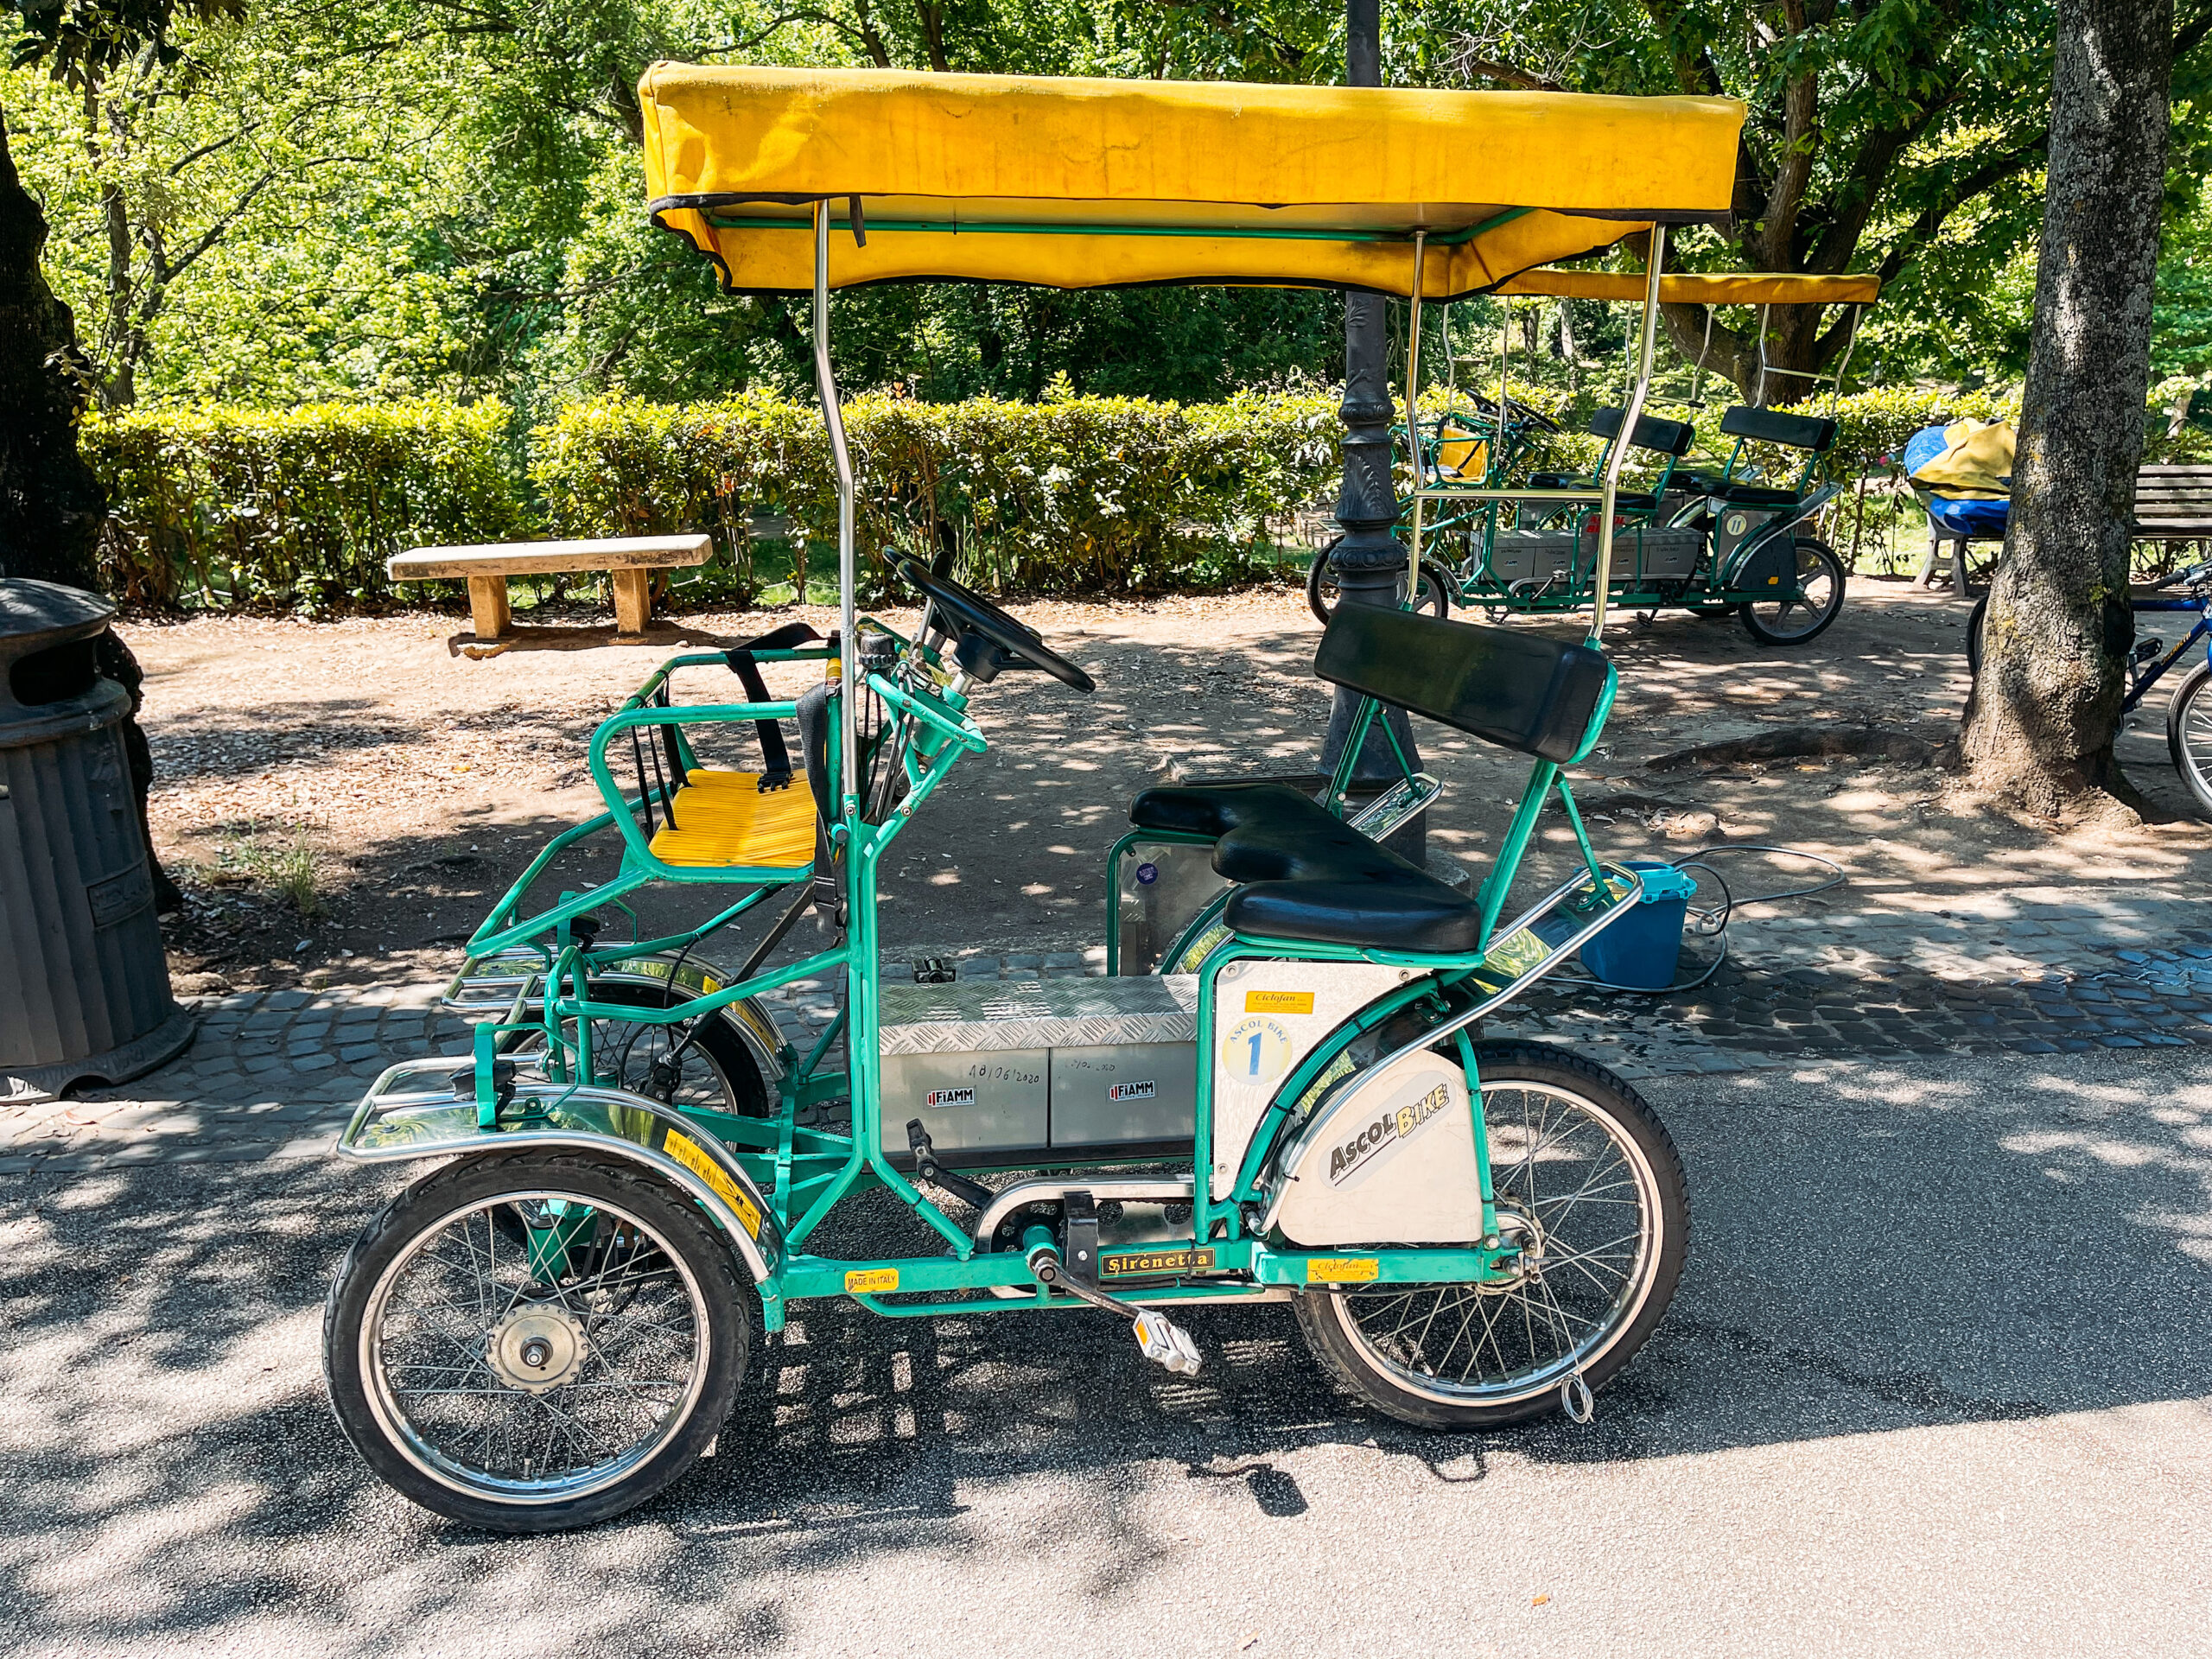 Bike rental from Ascor at Villa Borghese in Rome, Italy